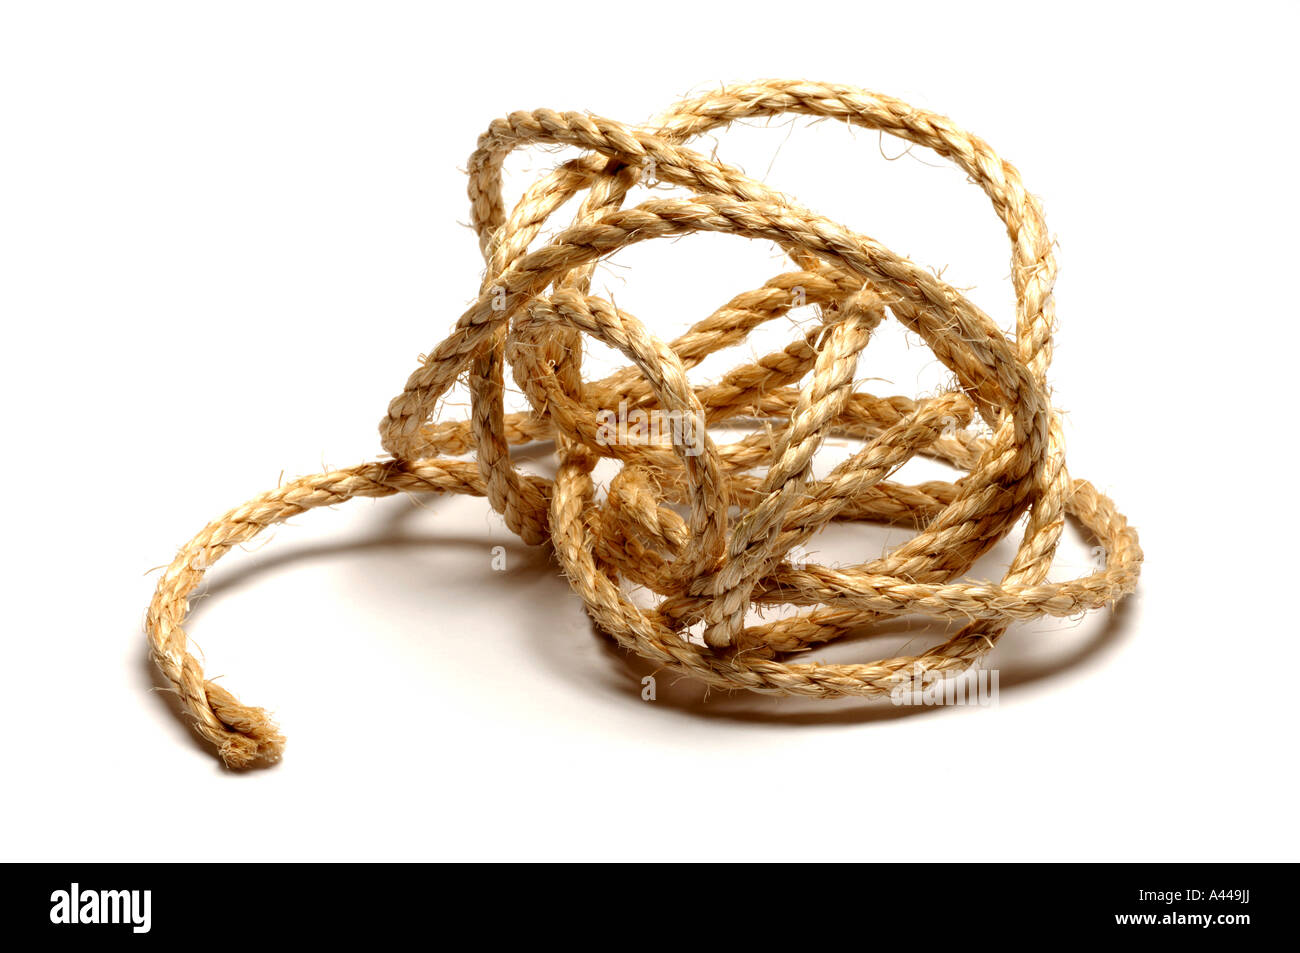 Tangled piece of rope Stock Photo